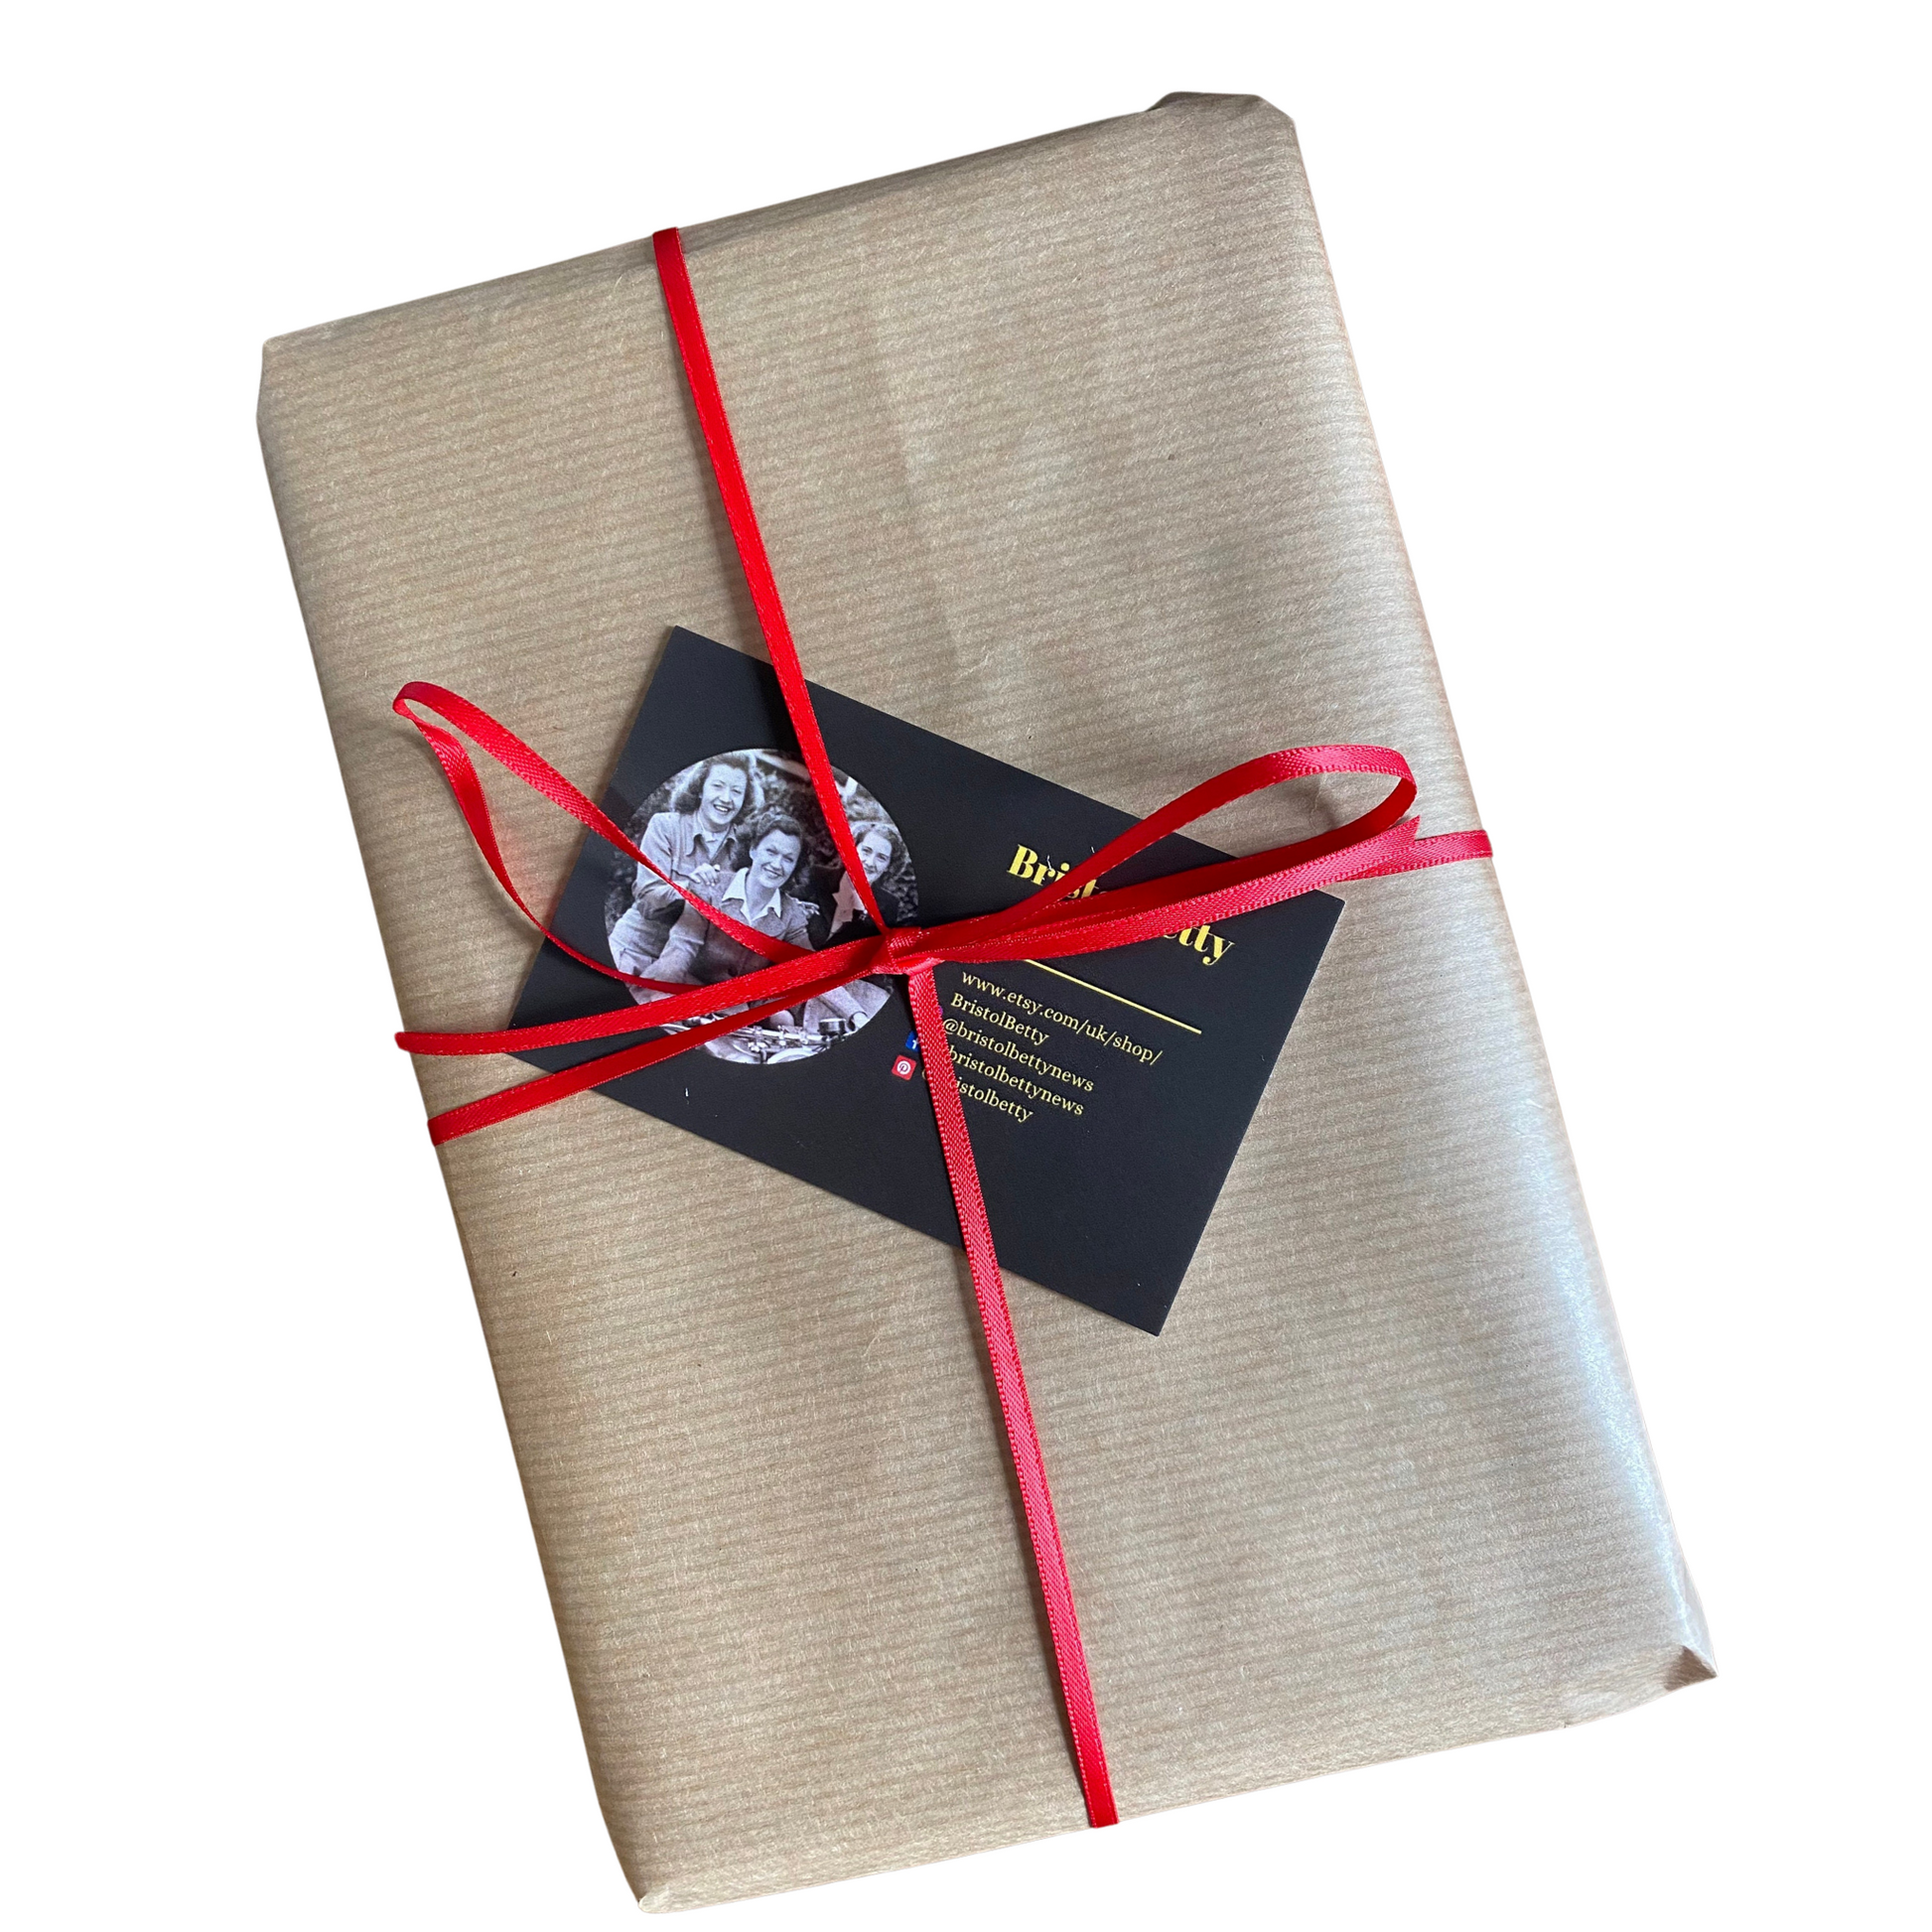 All books are gift wrapped in Kraft paper and ribbon 